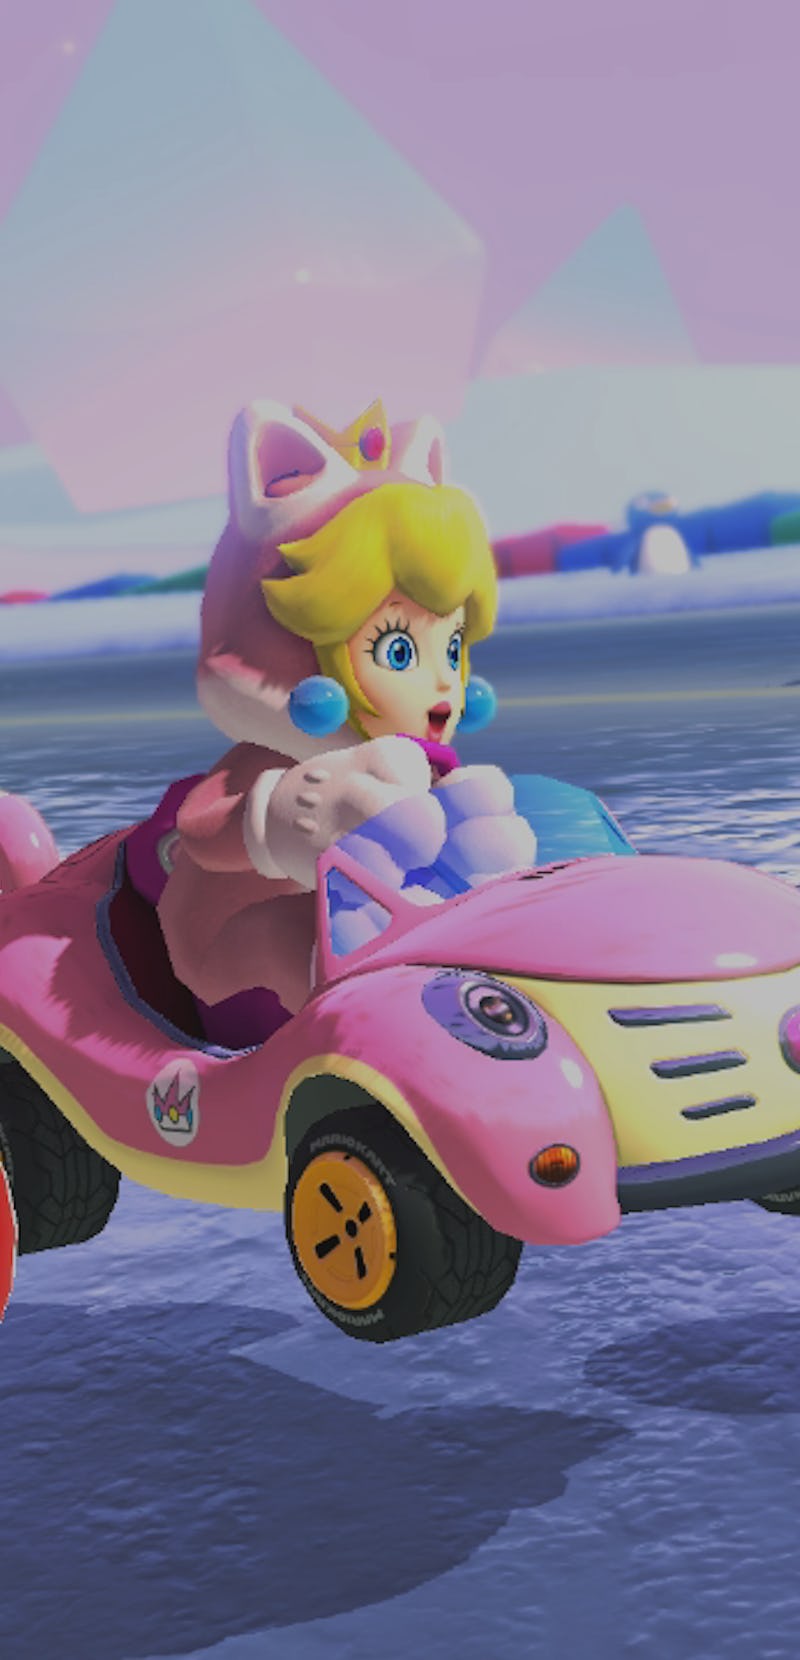 screenshot of Snow Land from Mario Kart 8 Deluxe Booster Course Pass Wave 2